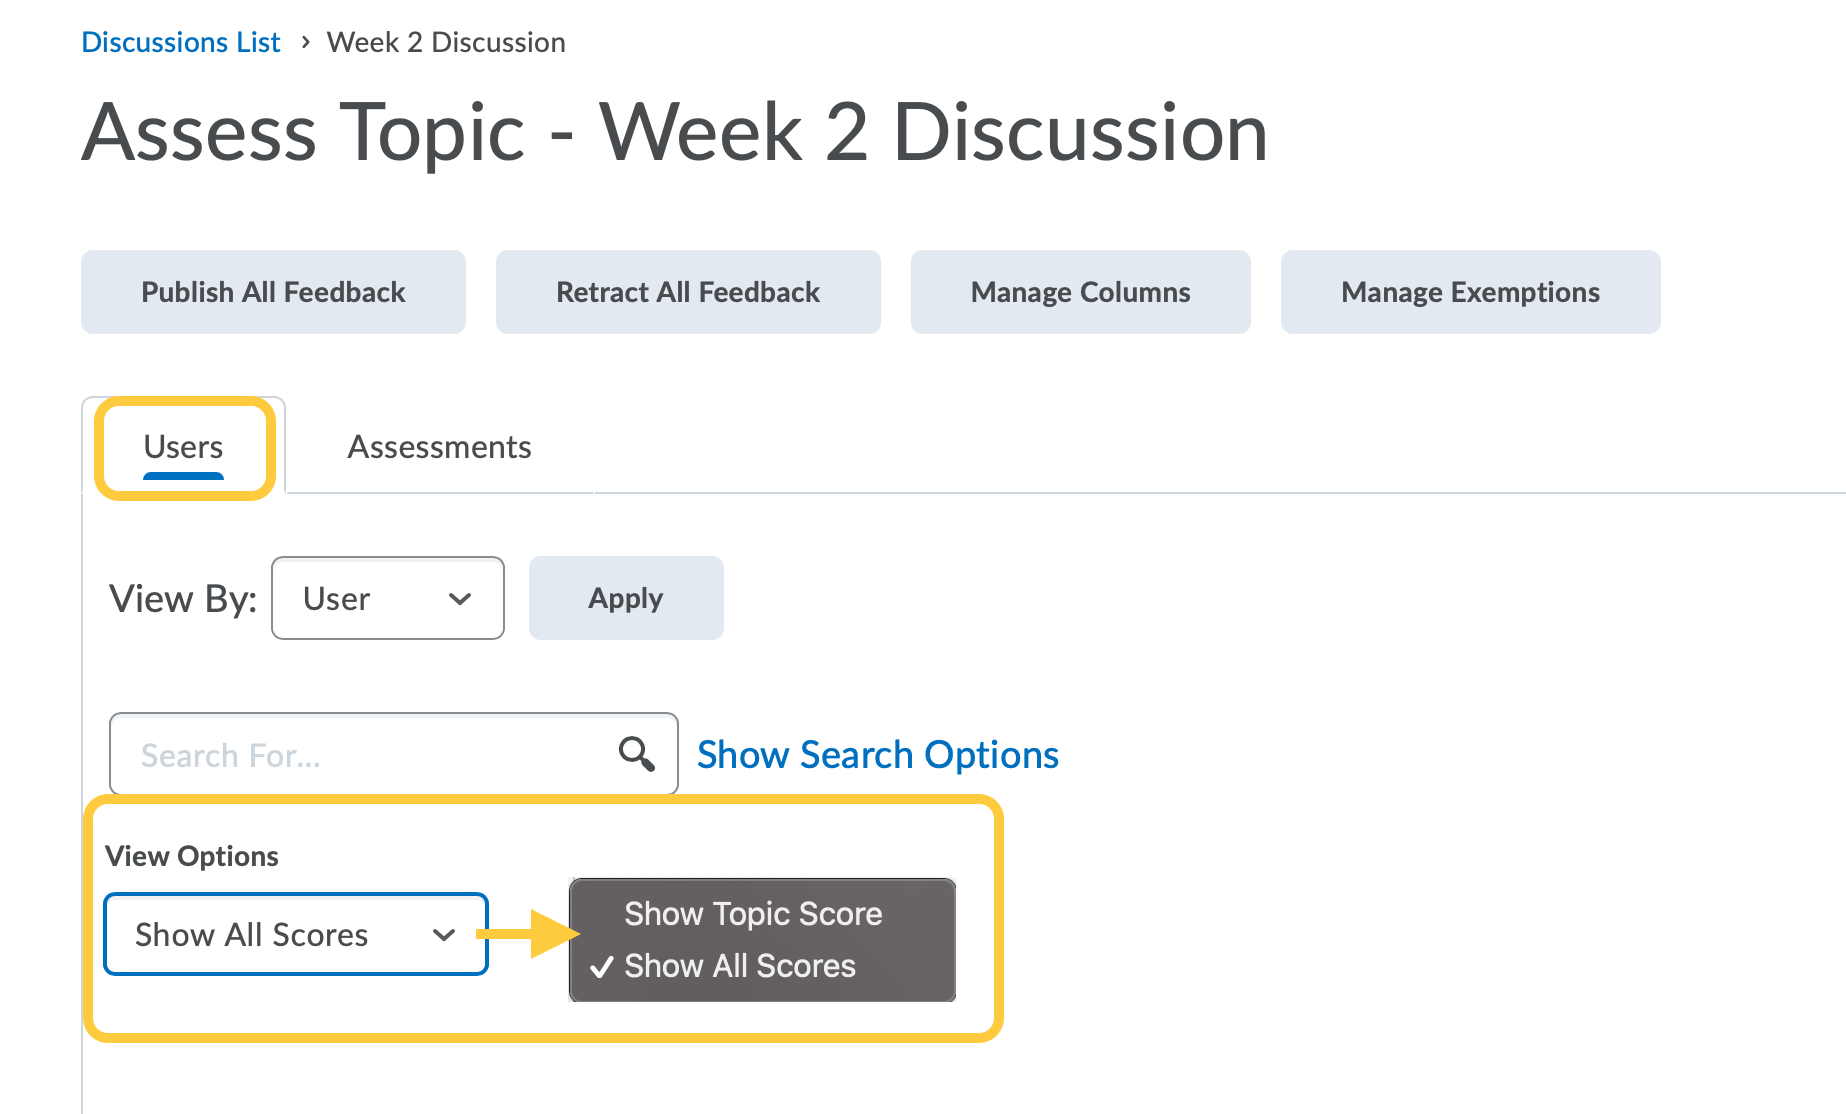 View Discussion Assessment from Users tab